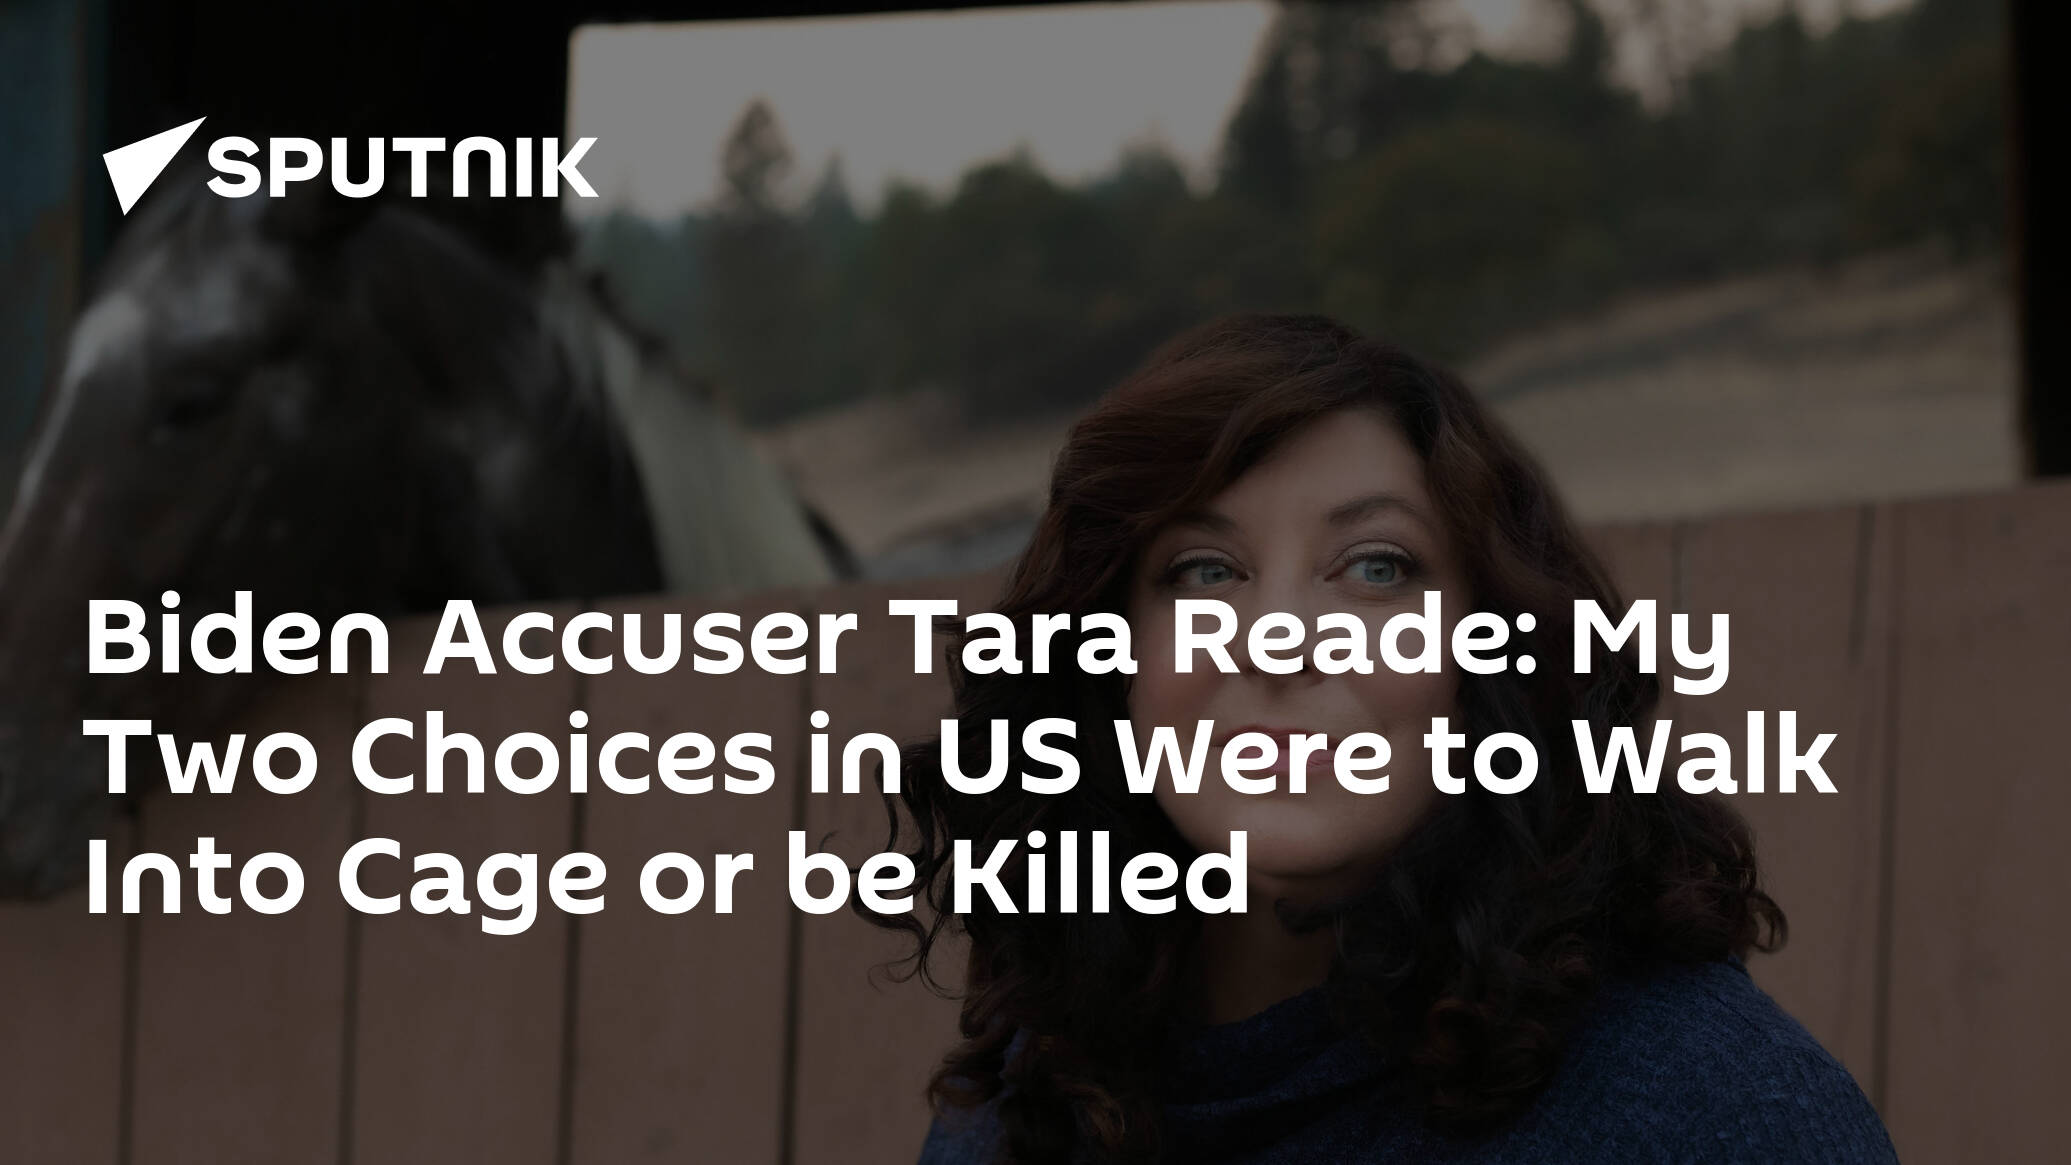 Biden Accuser Tara Reade: My Two Choices in US Were to Walk Into Cage or be Killed